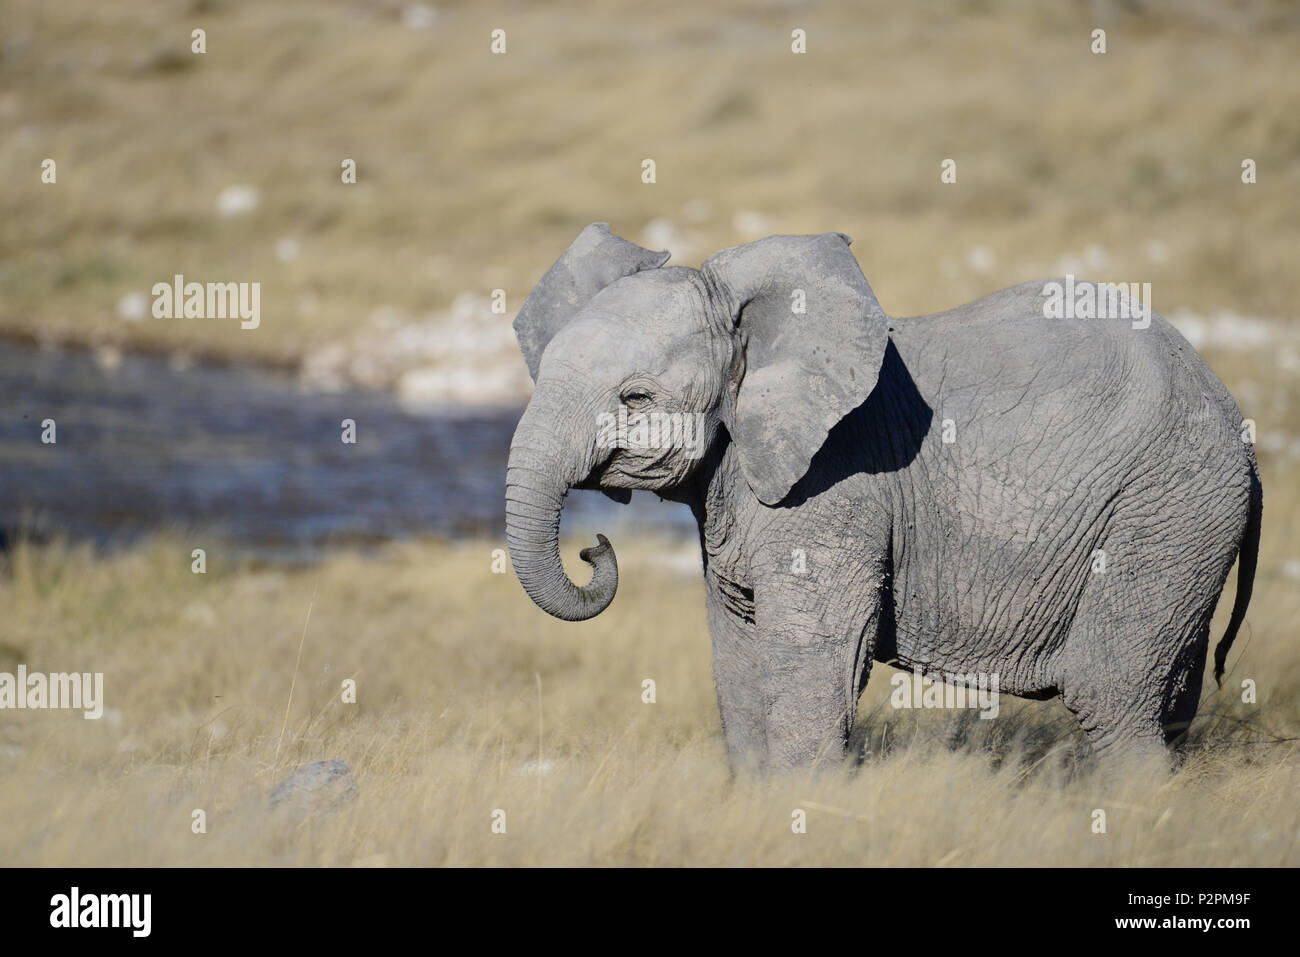 A lovely baby elephant stands in the grass on the savanna, by a waterhole, in Etosha National Park.  S/he has curled trunk and ears out. Stock Photo